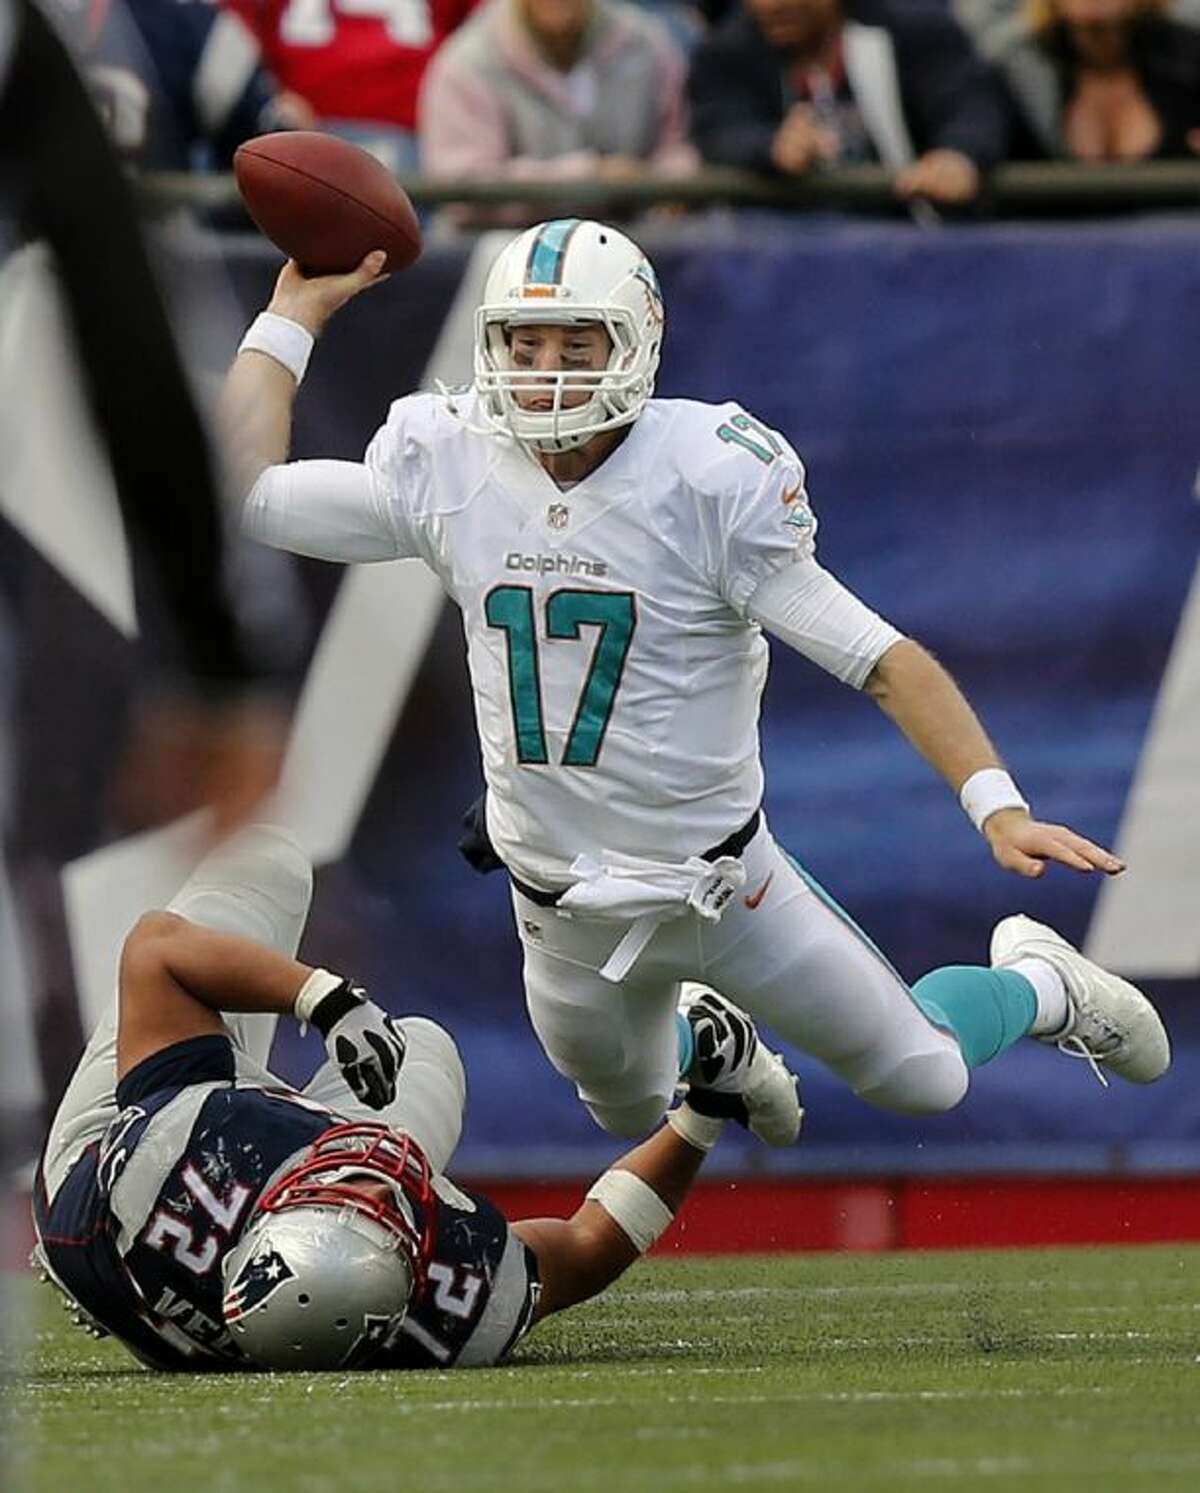 Miami Dolphins quarterback Ryan Tannehill gets rid of the ball as he is tackled by New England Patriots defensive tackle Joe Vellano on Sunday in Foxborough, Mass. The Patriots won 27-17.